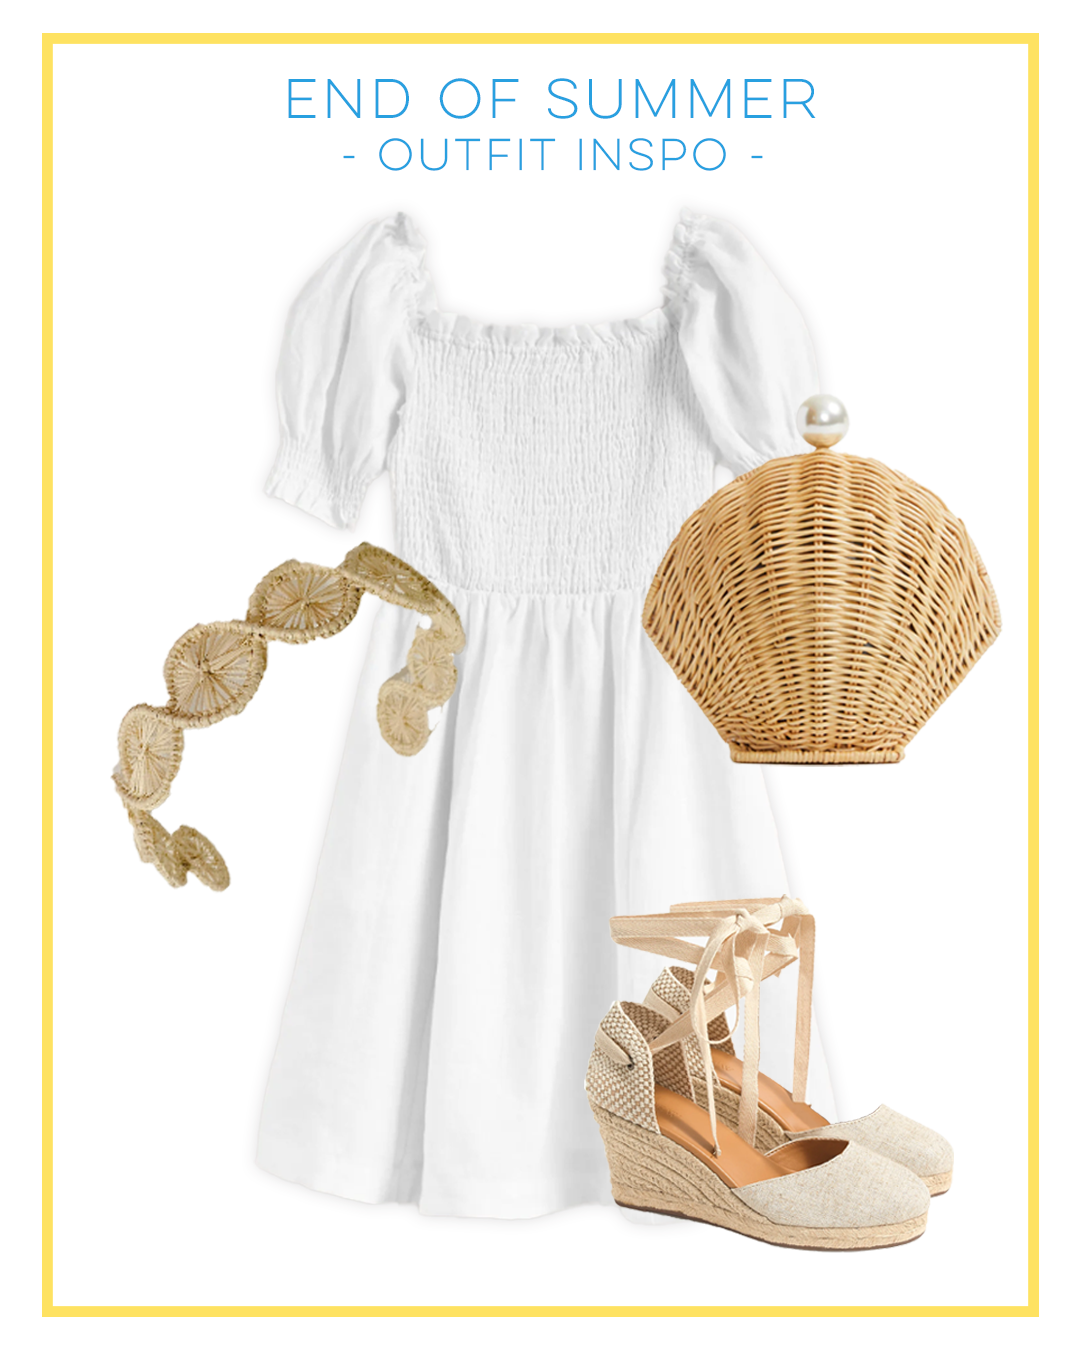 End of Summer Outfit Inspiration, White Sundress, Raffia Headband, Shell Bag and Espadrilles 